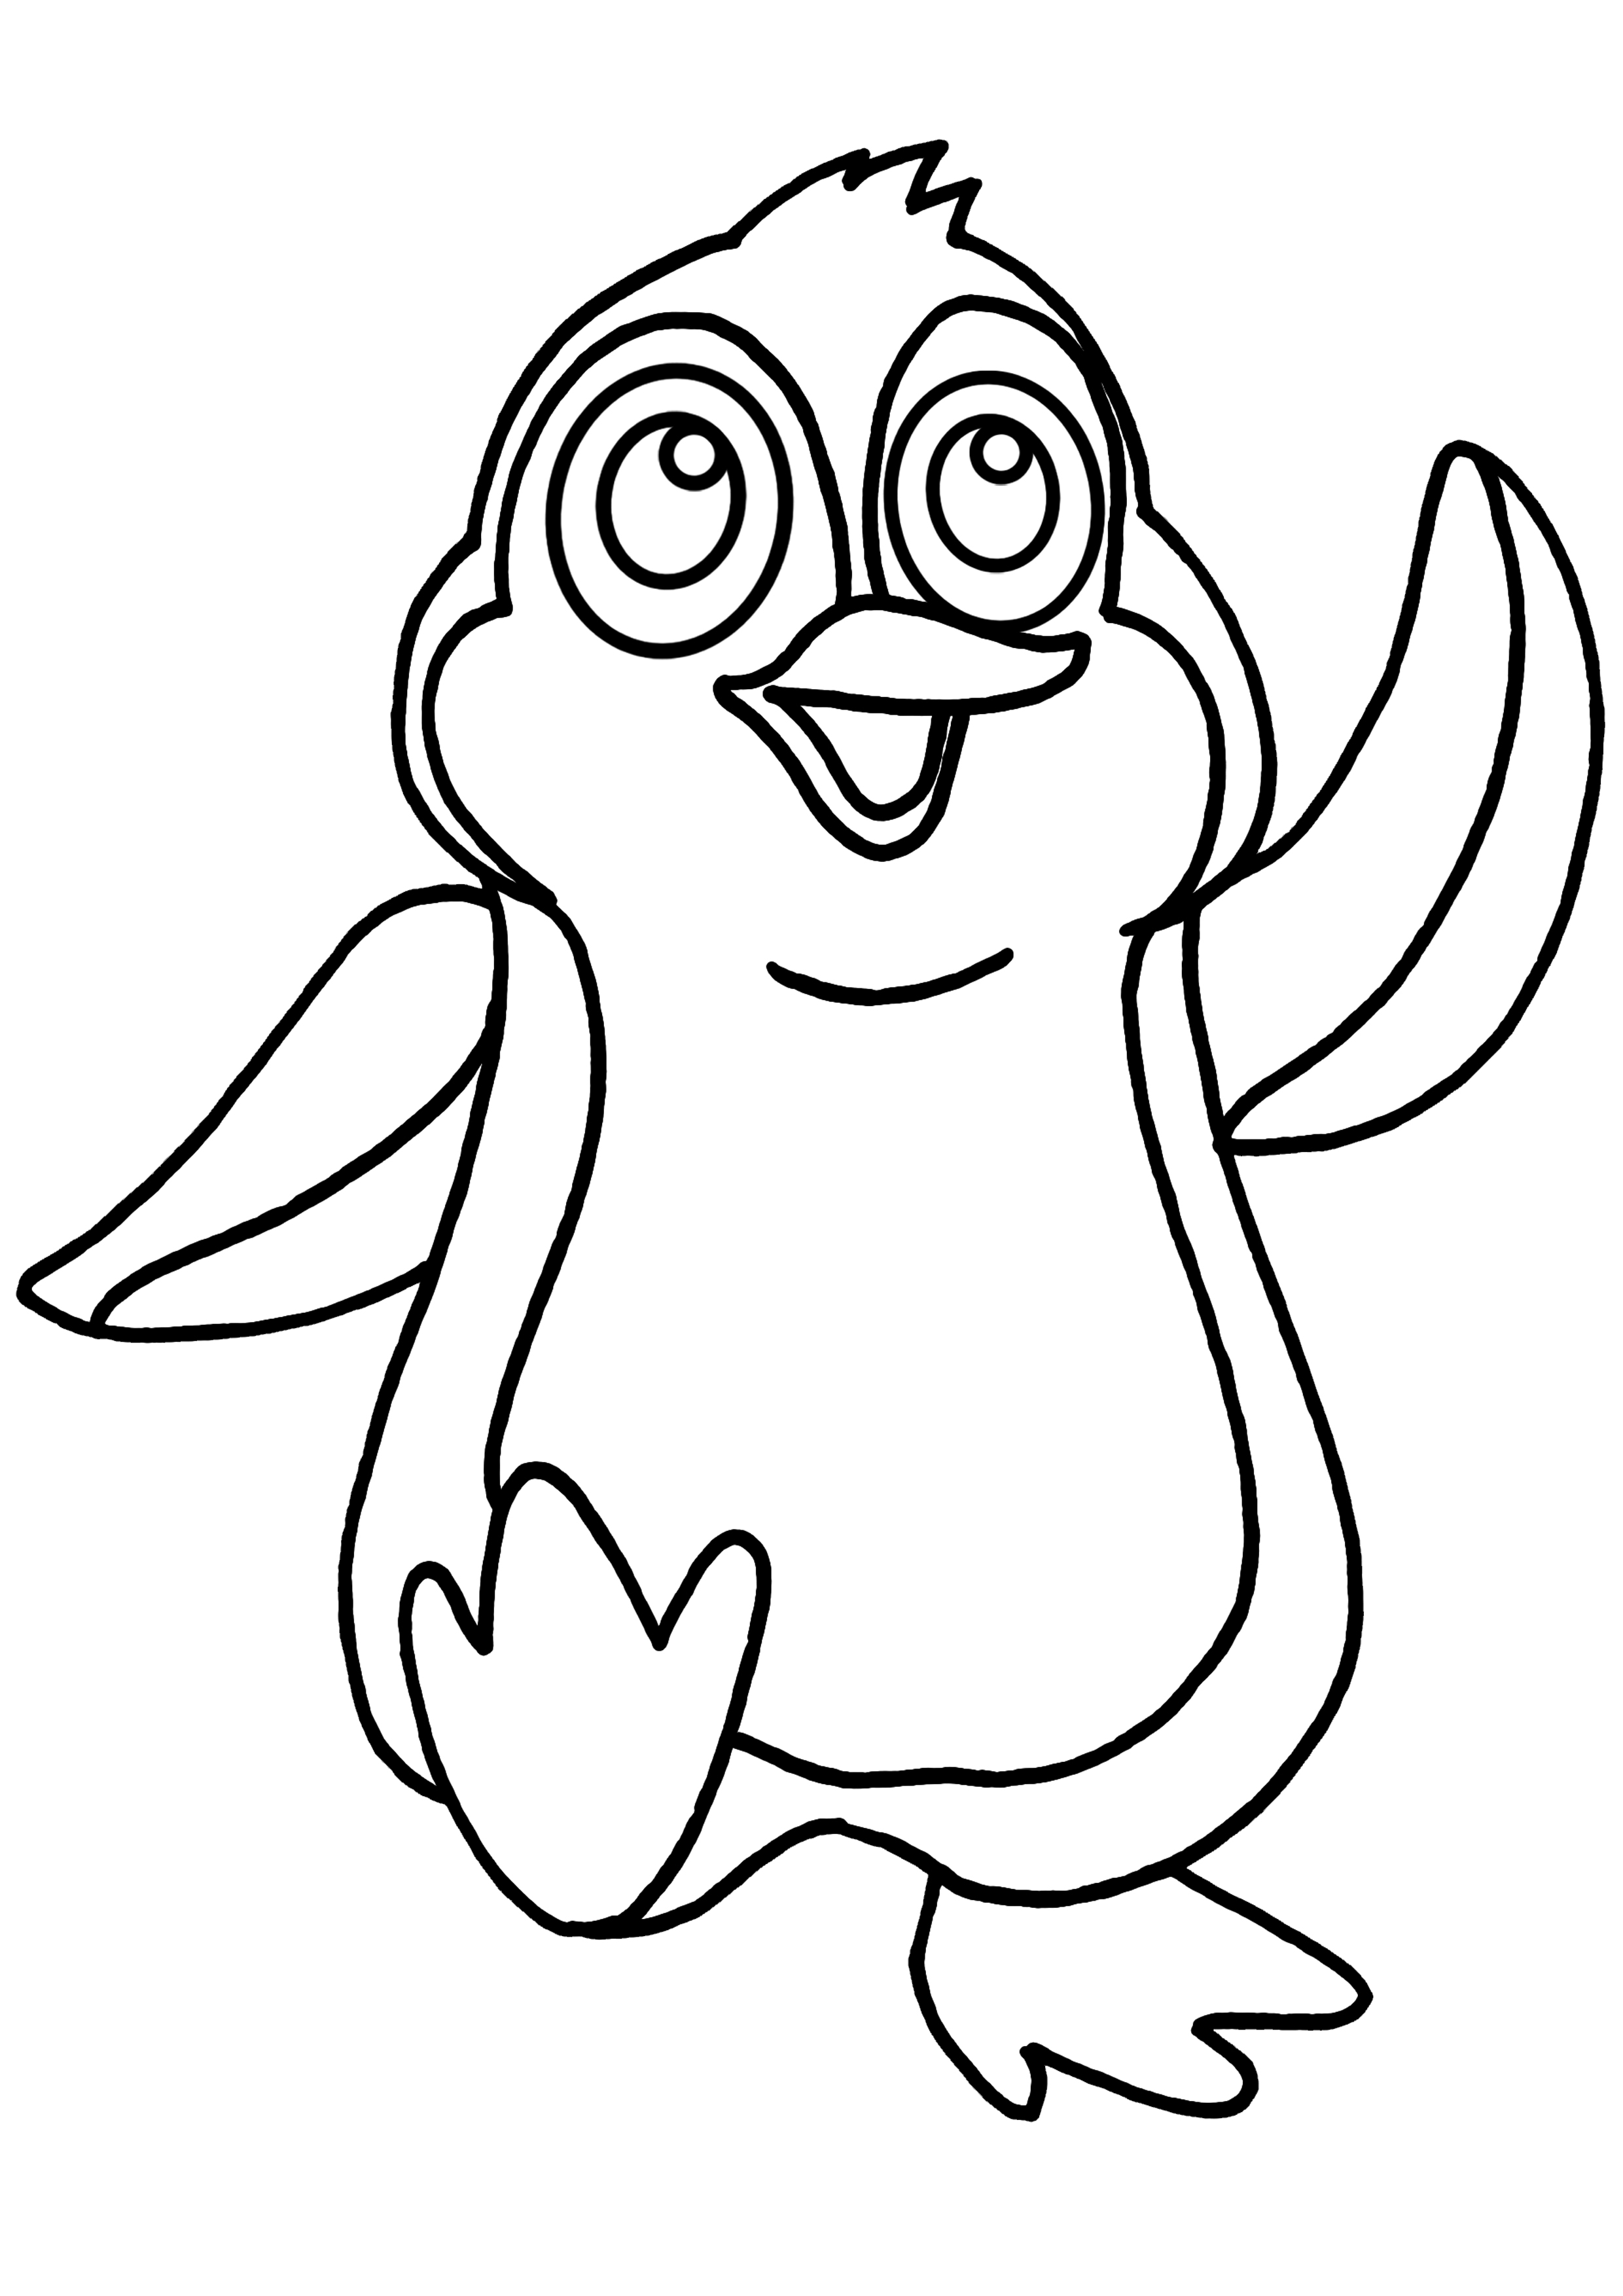 Penguin Coloring Sheets Printable